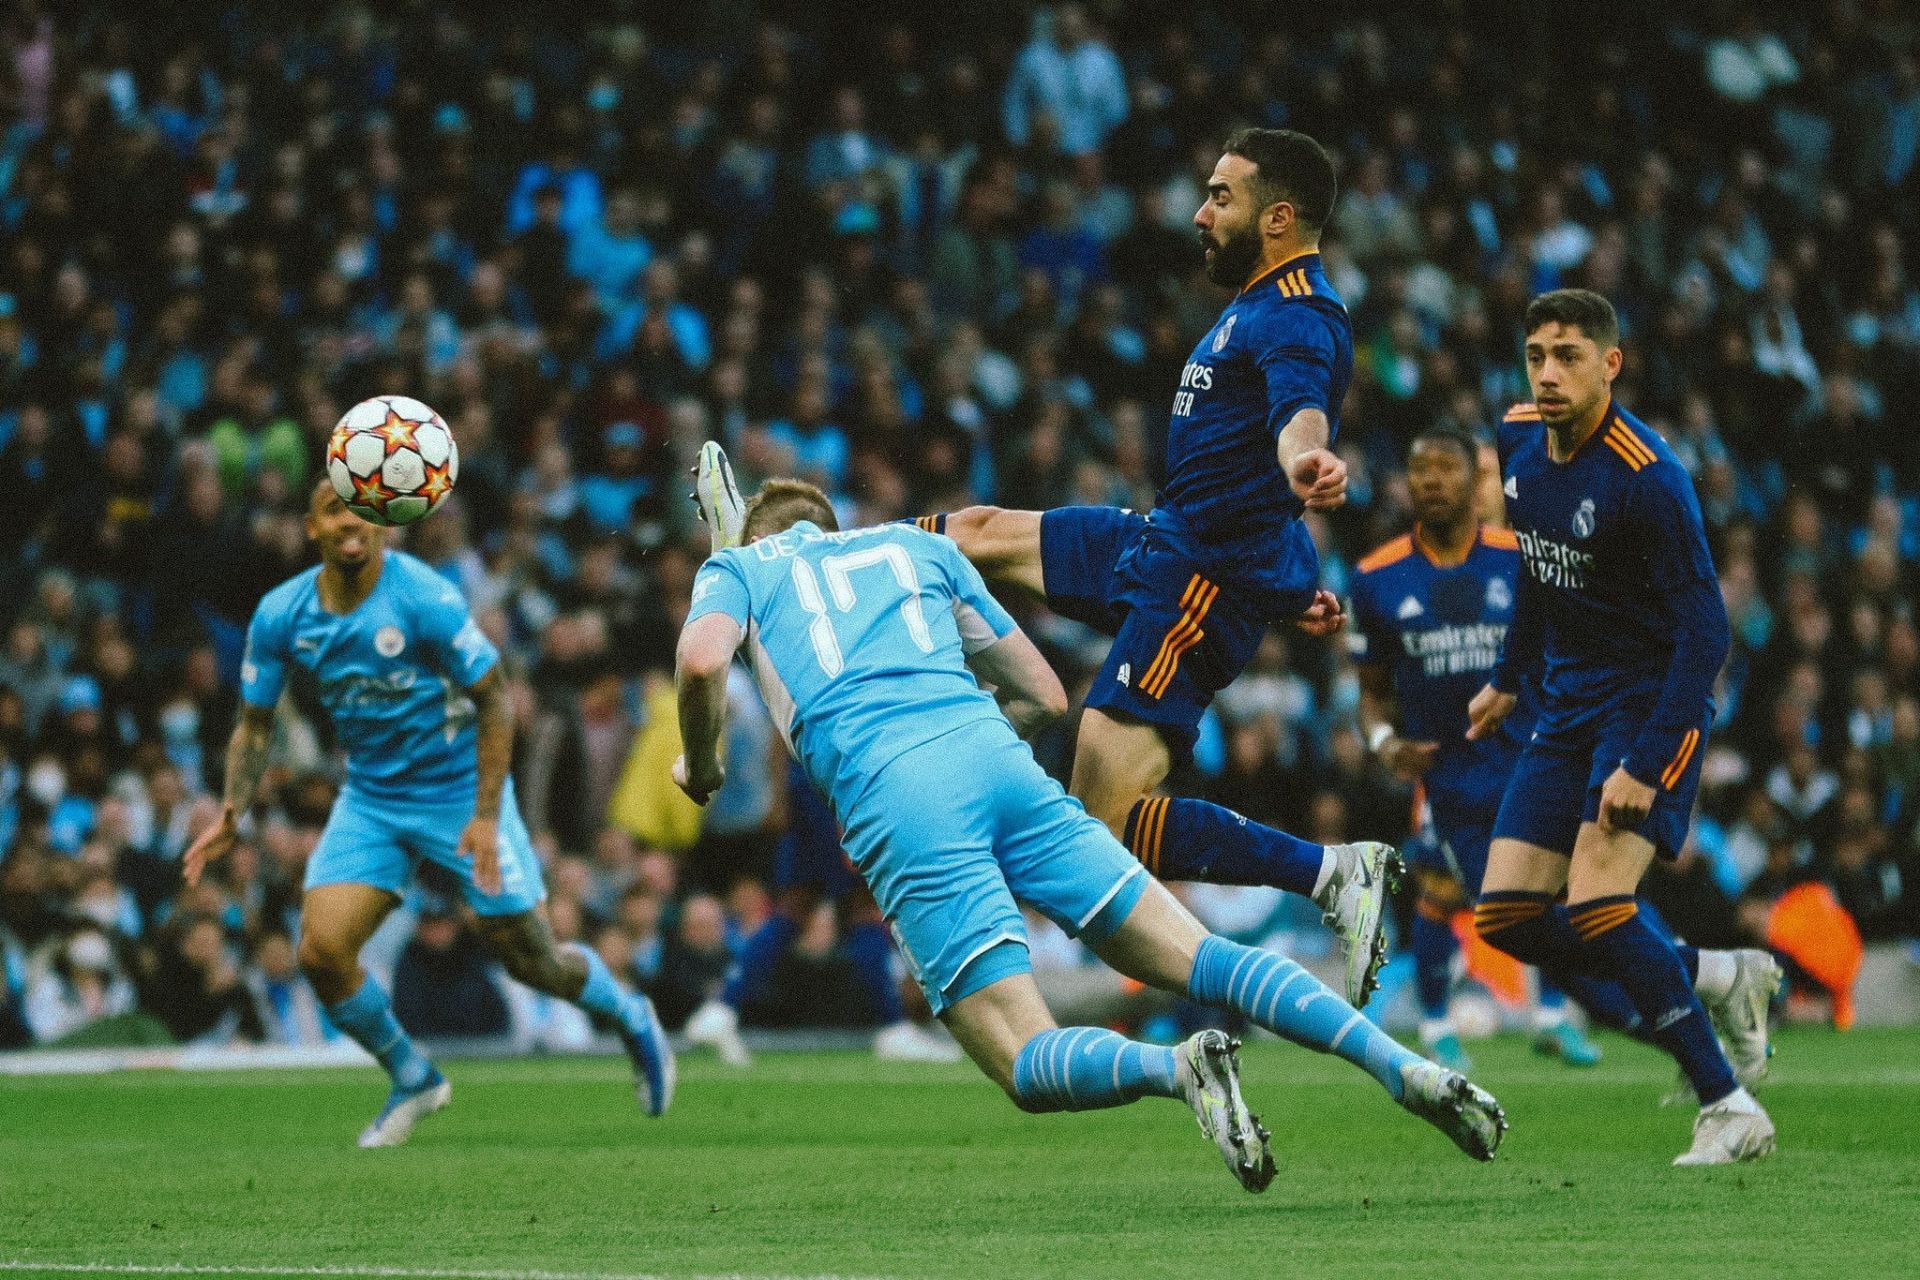 Manchester City wasted several chances in their 4-3 win against Real Madrid